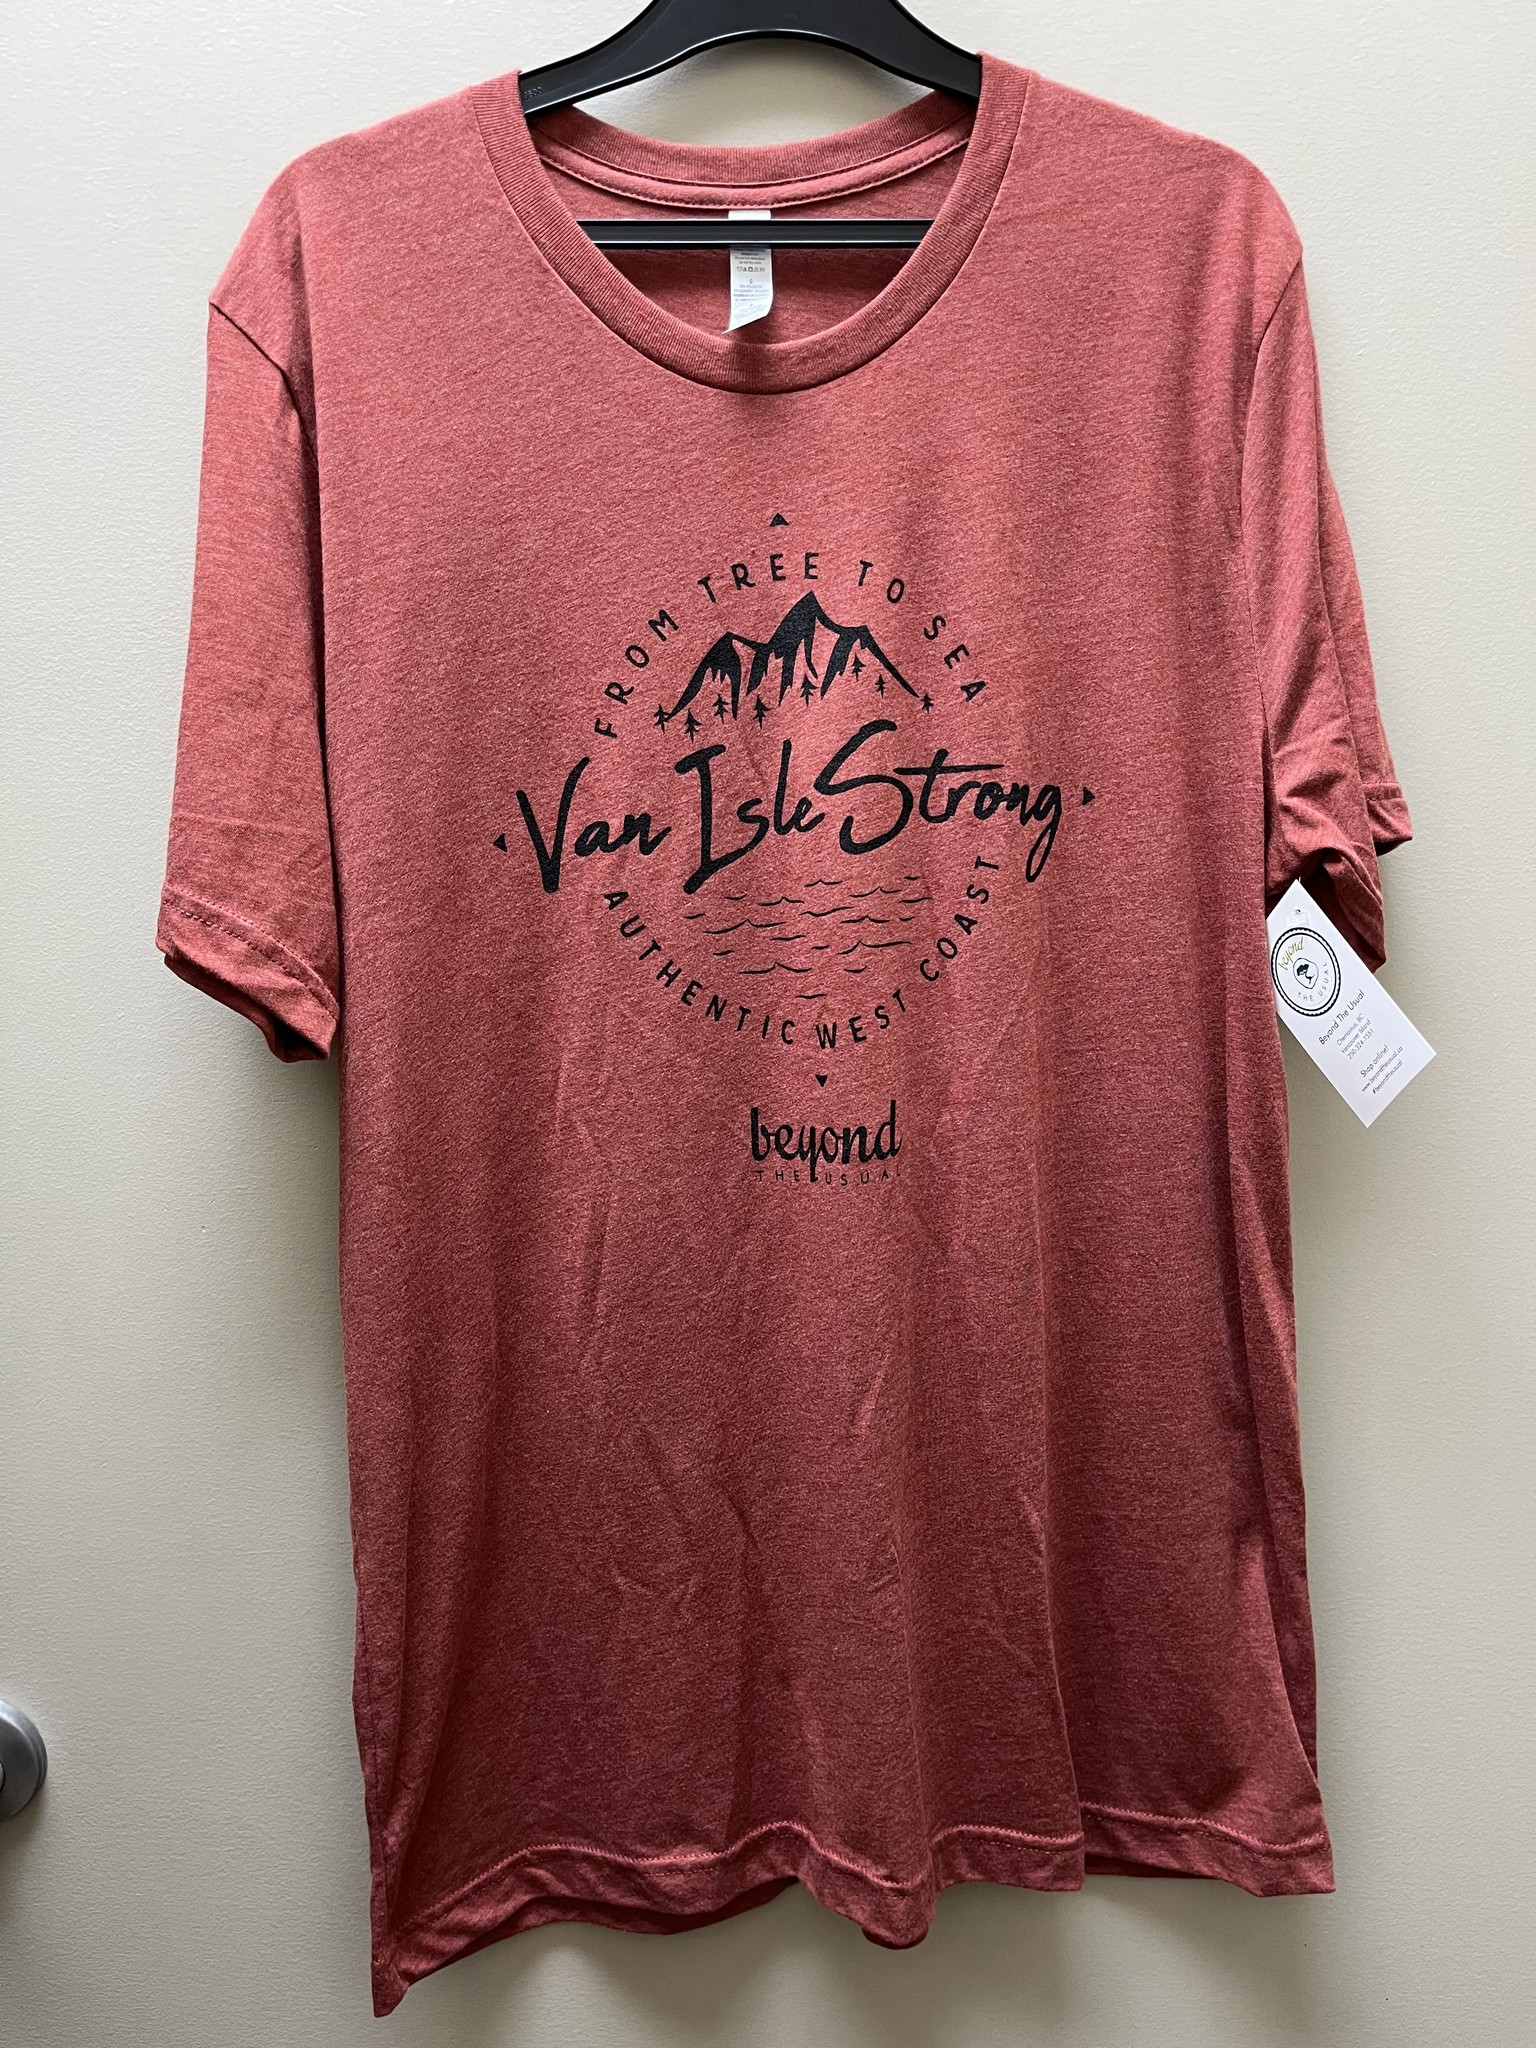 Beyond The Usual BTU Men's VI Strong Tee Rust